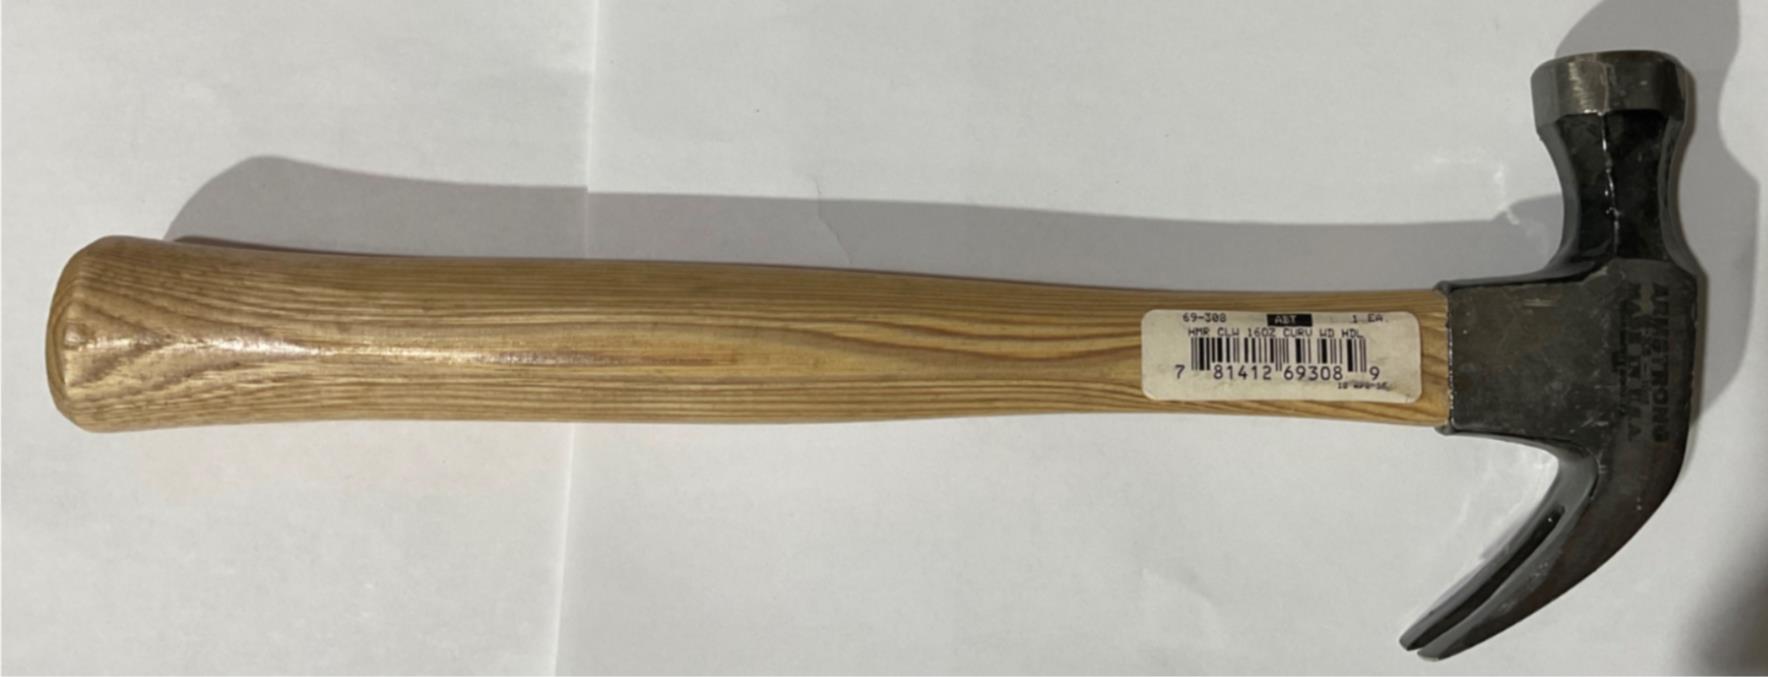 Armstrong 69-308 16oz head, curved claw, wood handle 13" OAL USA